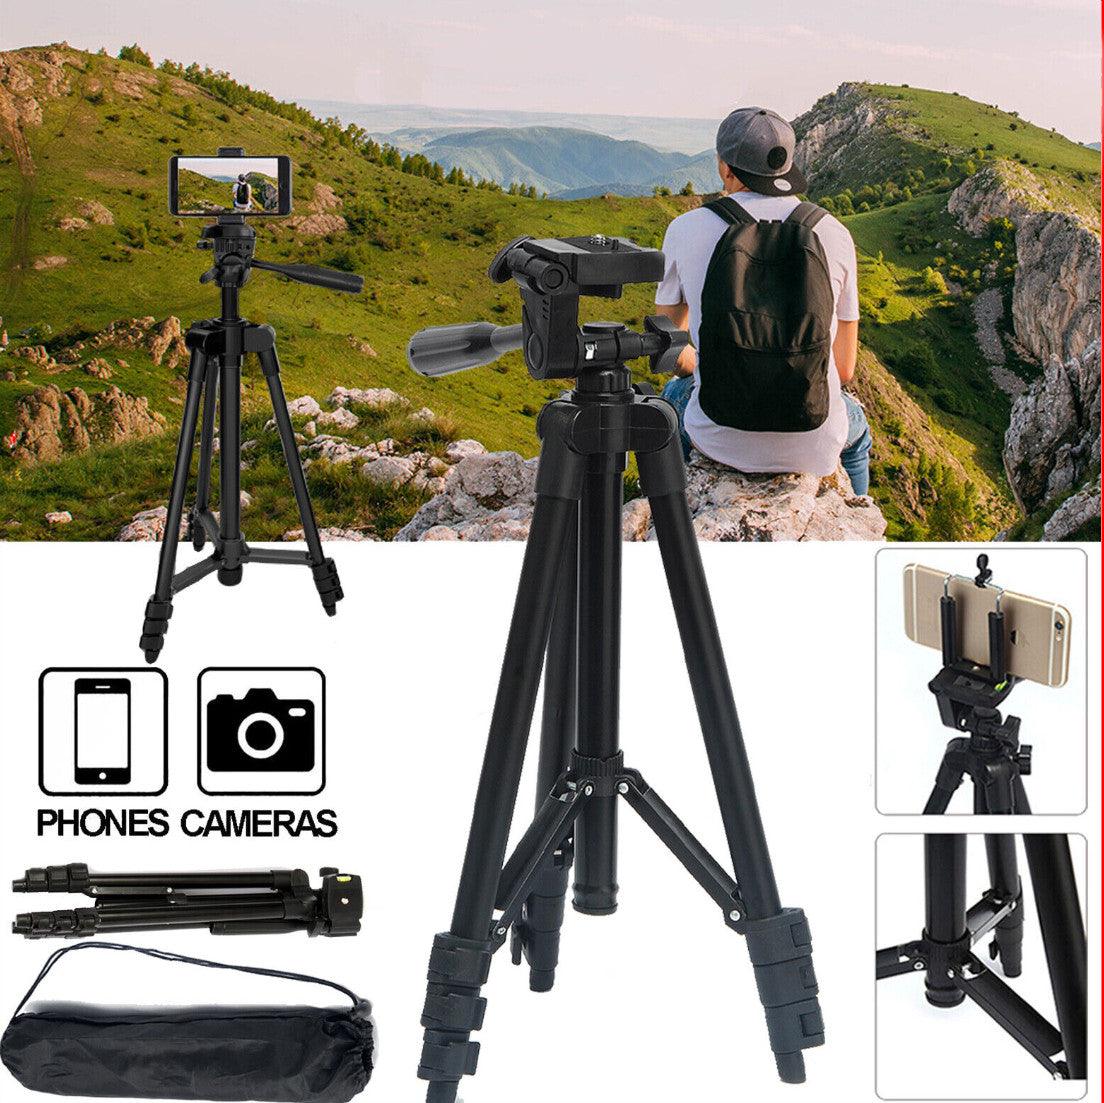  Camera Tripod Stand  outdoor use